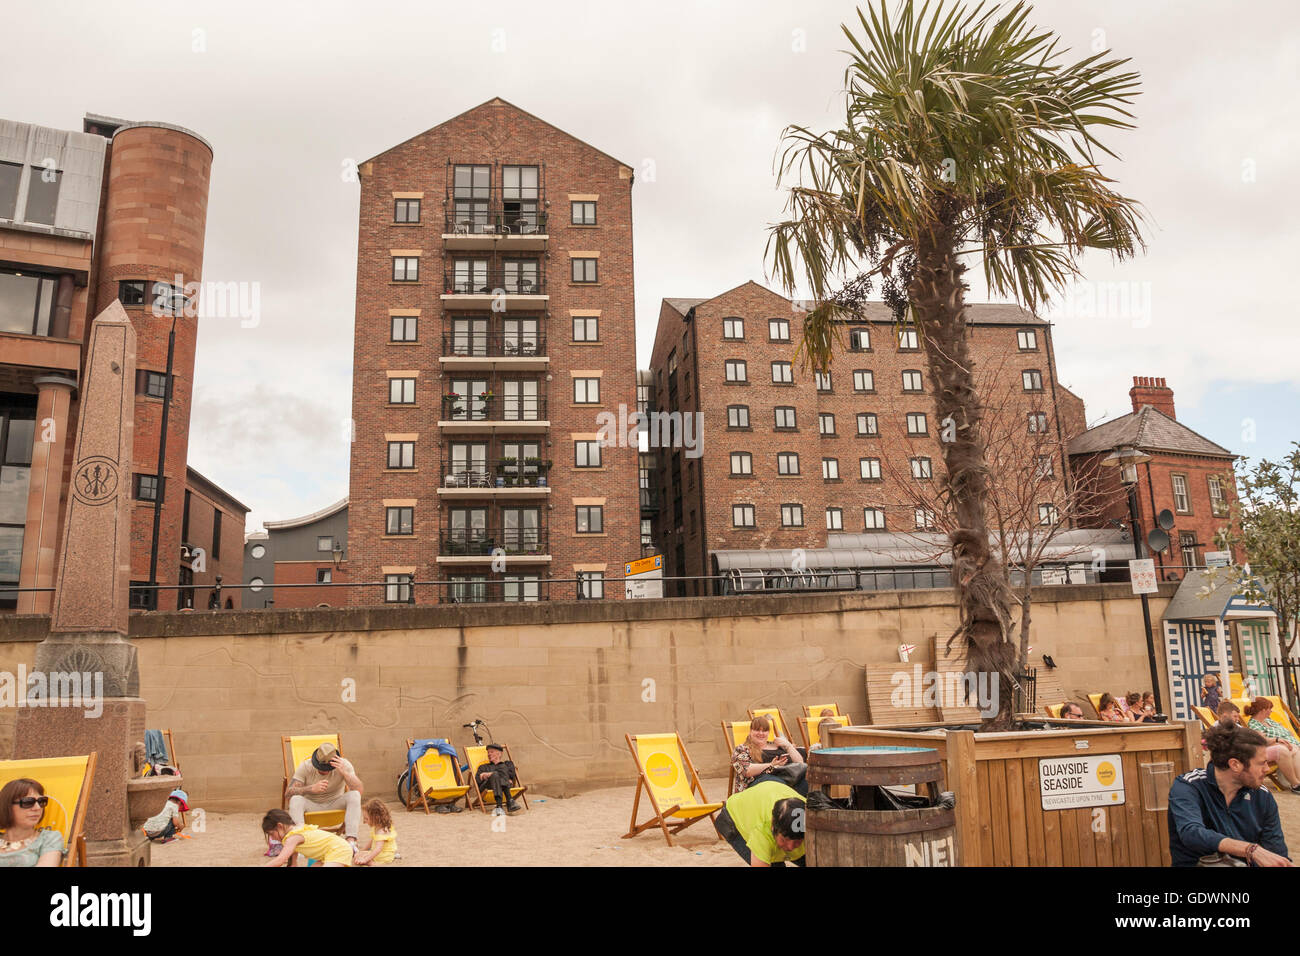 People relaxing on the pop up beach at the Quayside Seaside premises by the banks of the River Tyne at Newcastle upon Tyne Stock Photo